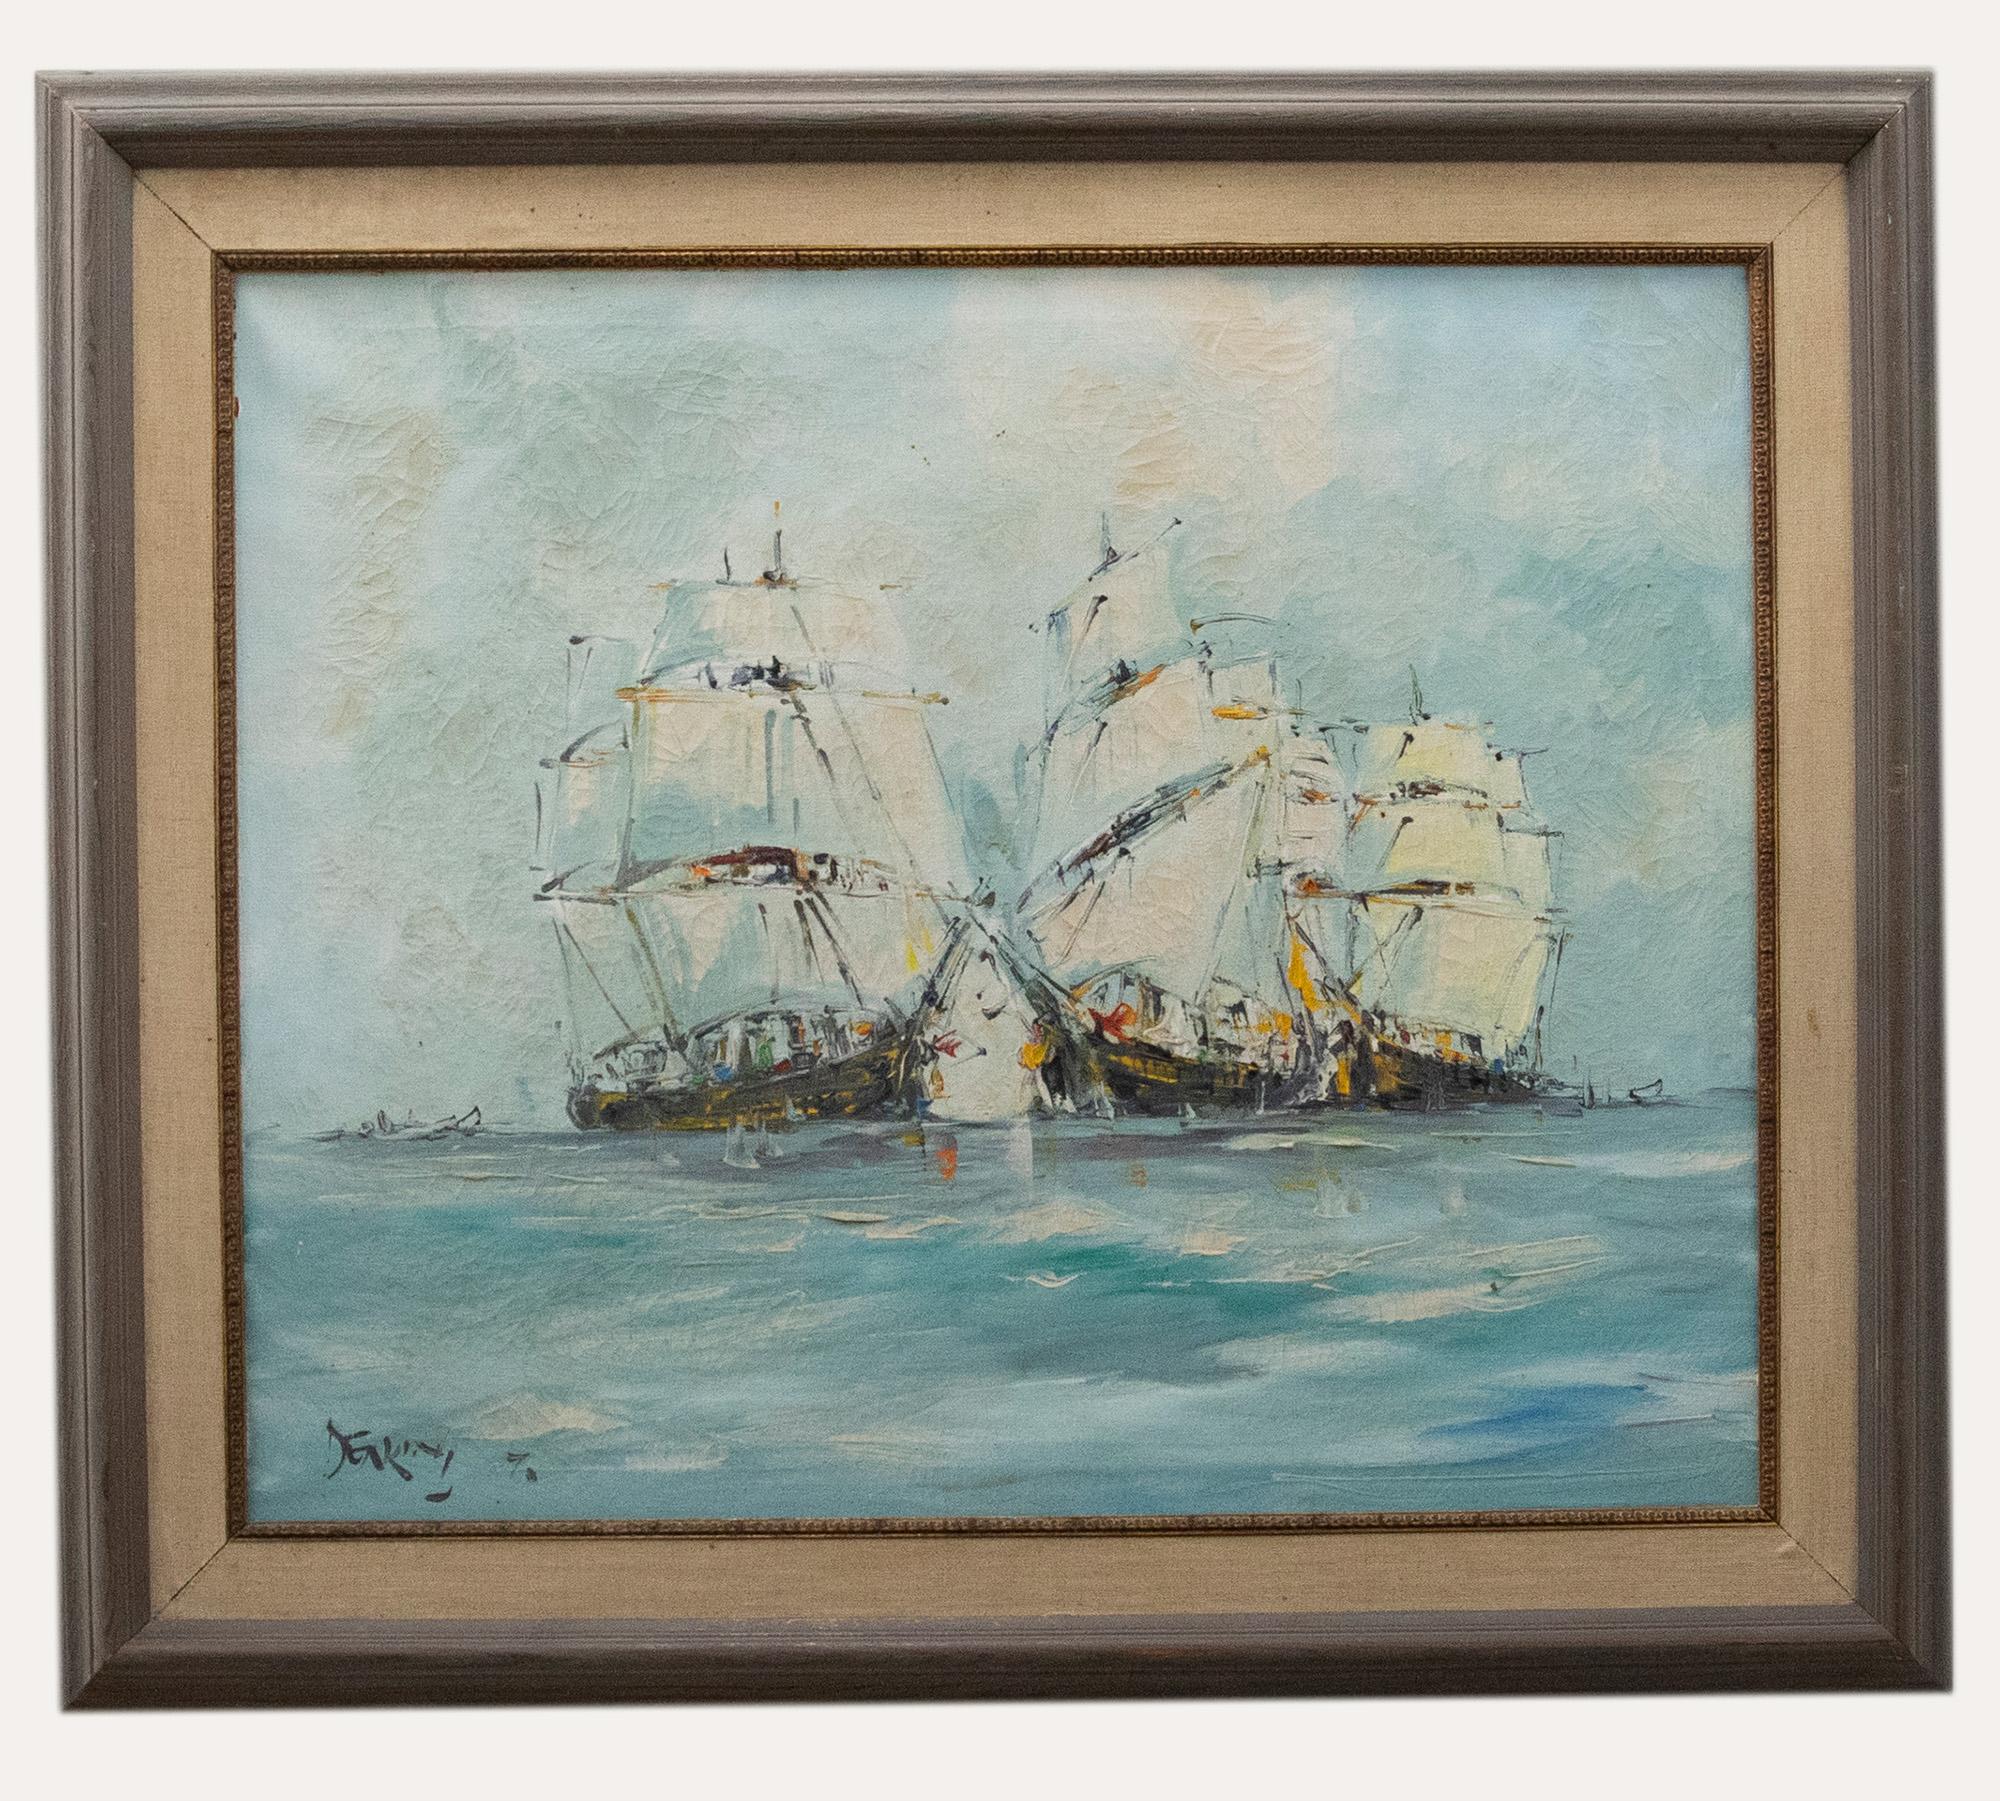 Unknown Figurative Painting - George Richard Deakins (1911-1982) - Framed 20th Century Oil, A Royal Fleet